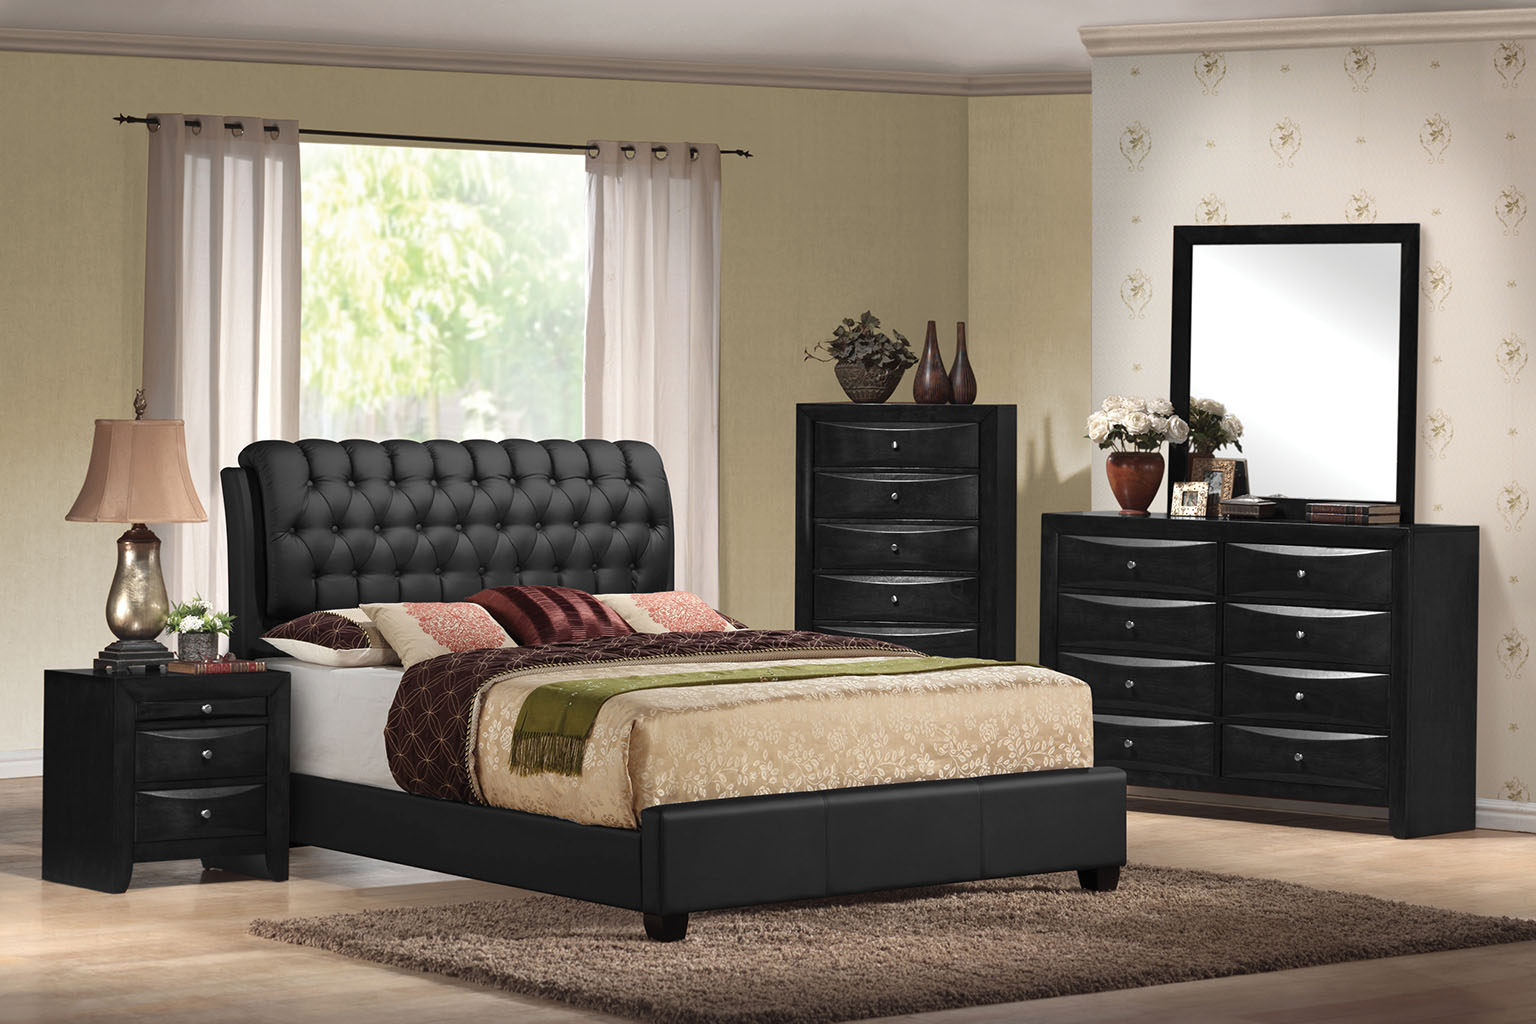 85" X 63" X 50" Black Pu Button Tufted Queen Bed